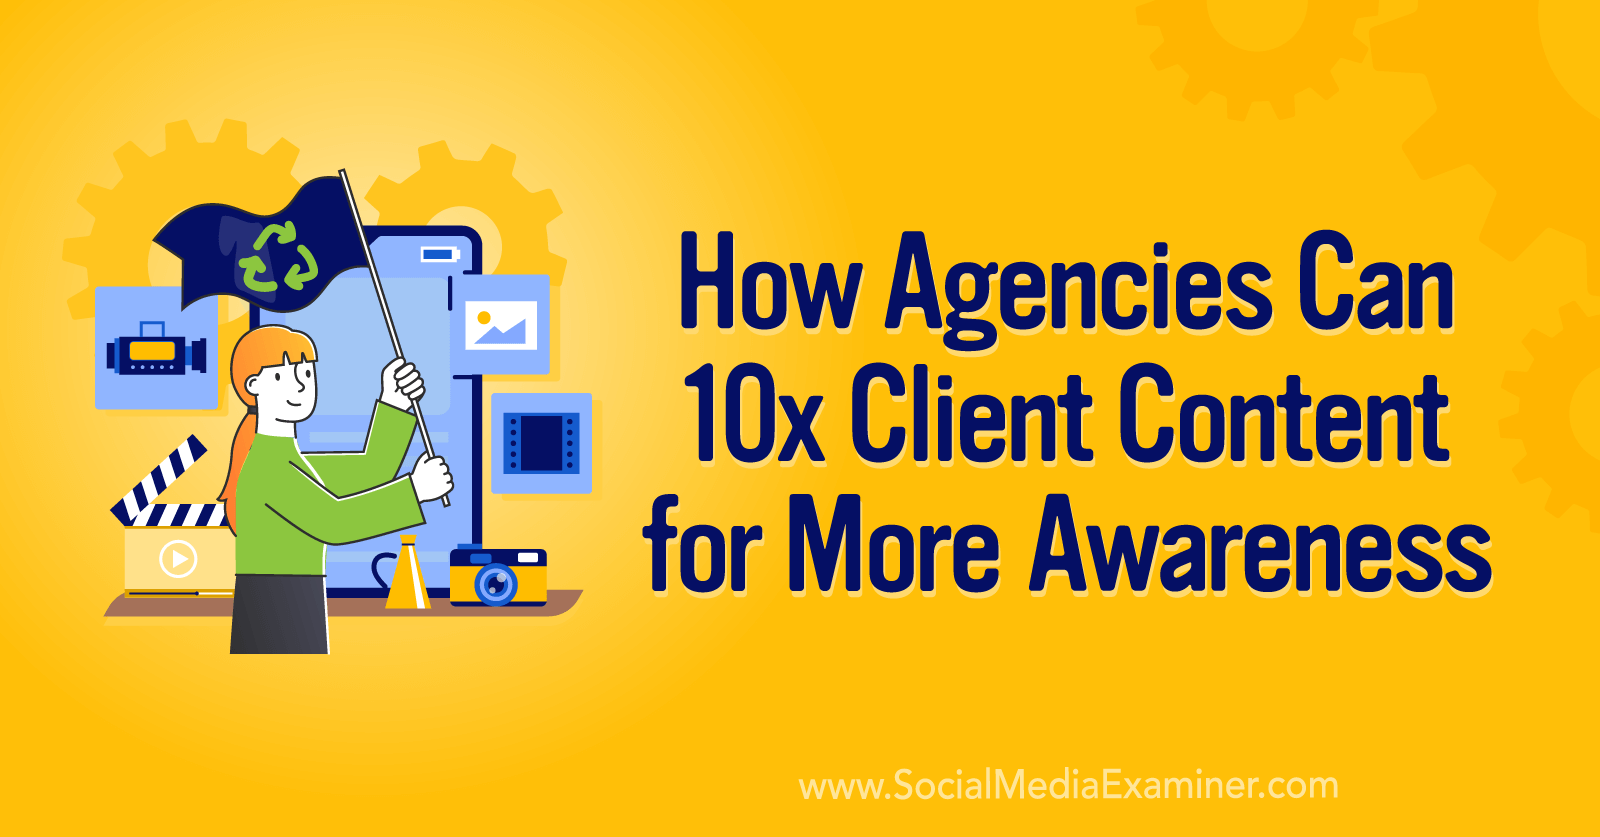 How Agencies Can 10X Client Content for More Awareness by Social Media Examiner